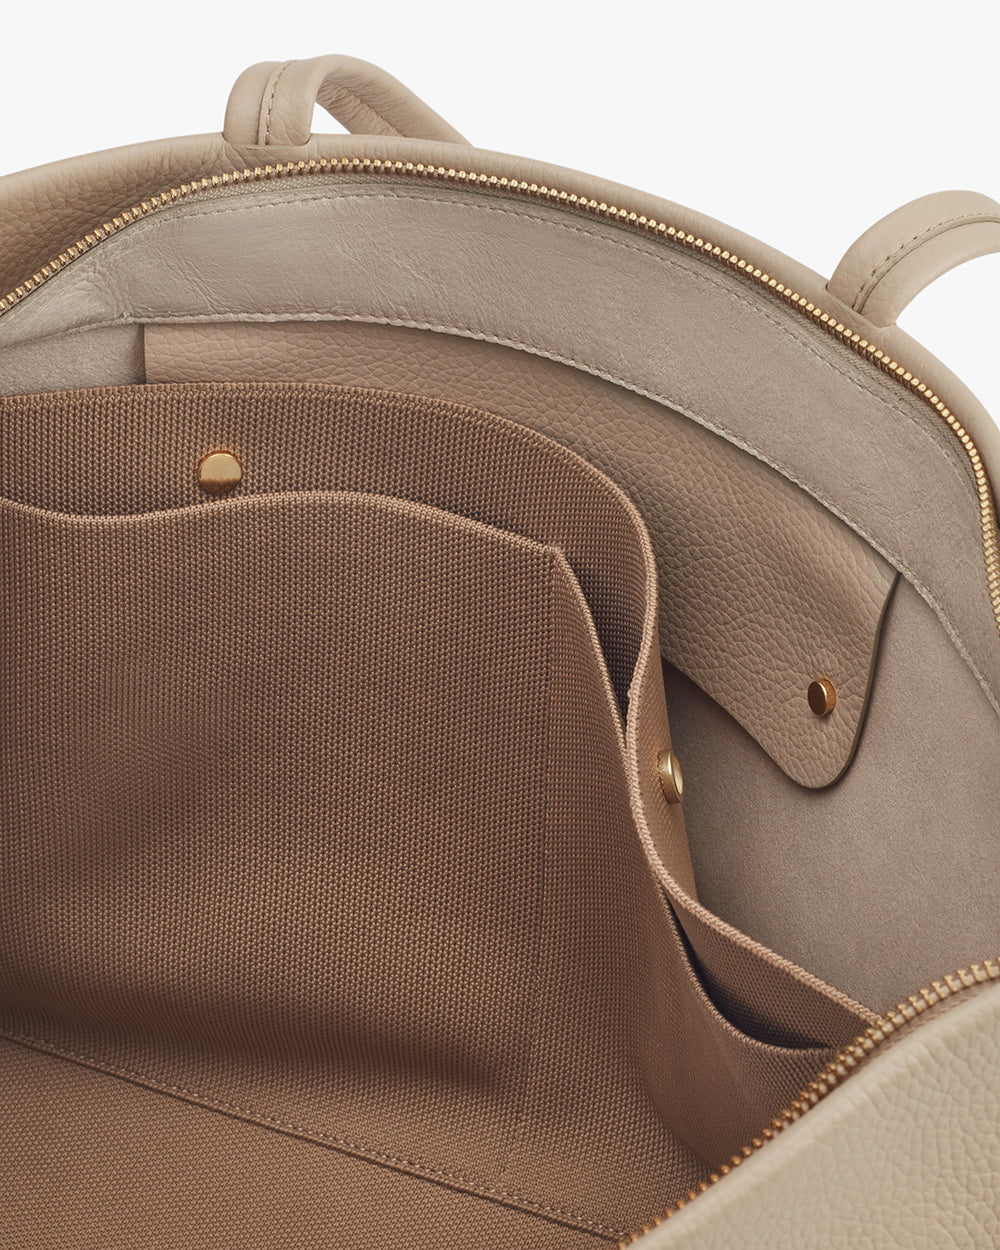 Close-up of an open backpack with visible pockets and zippers.